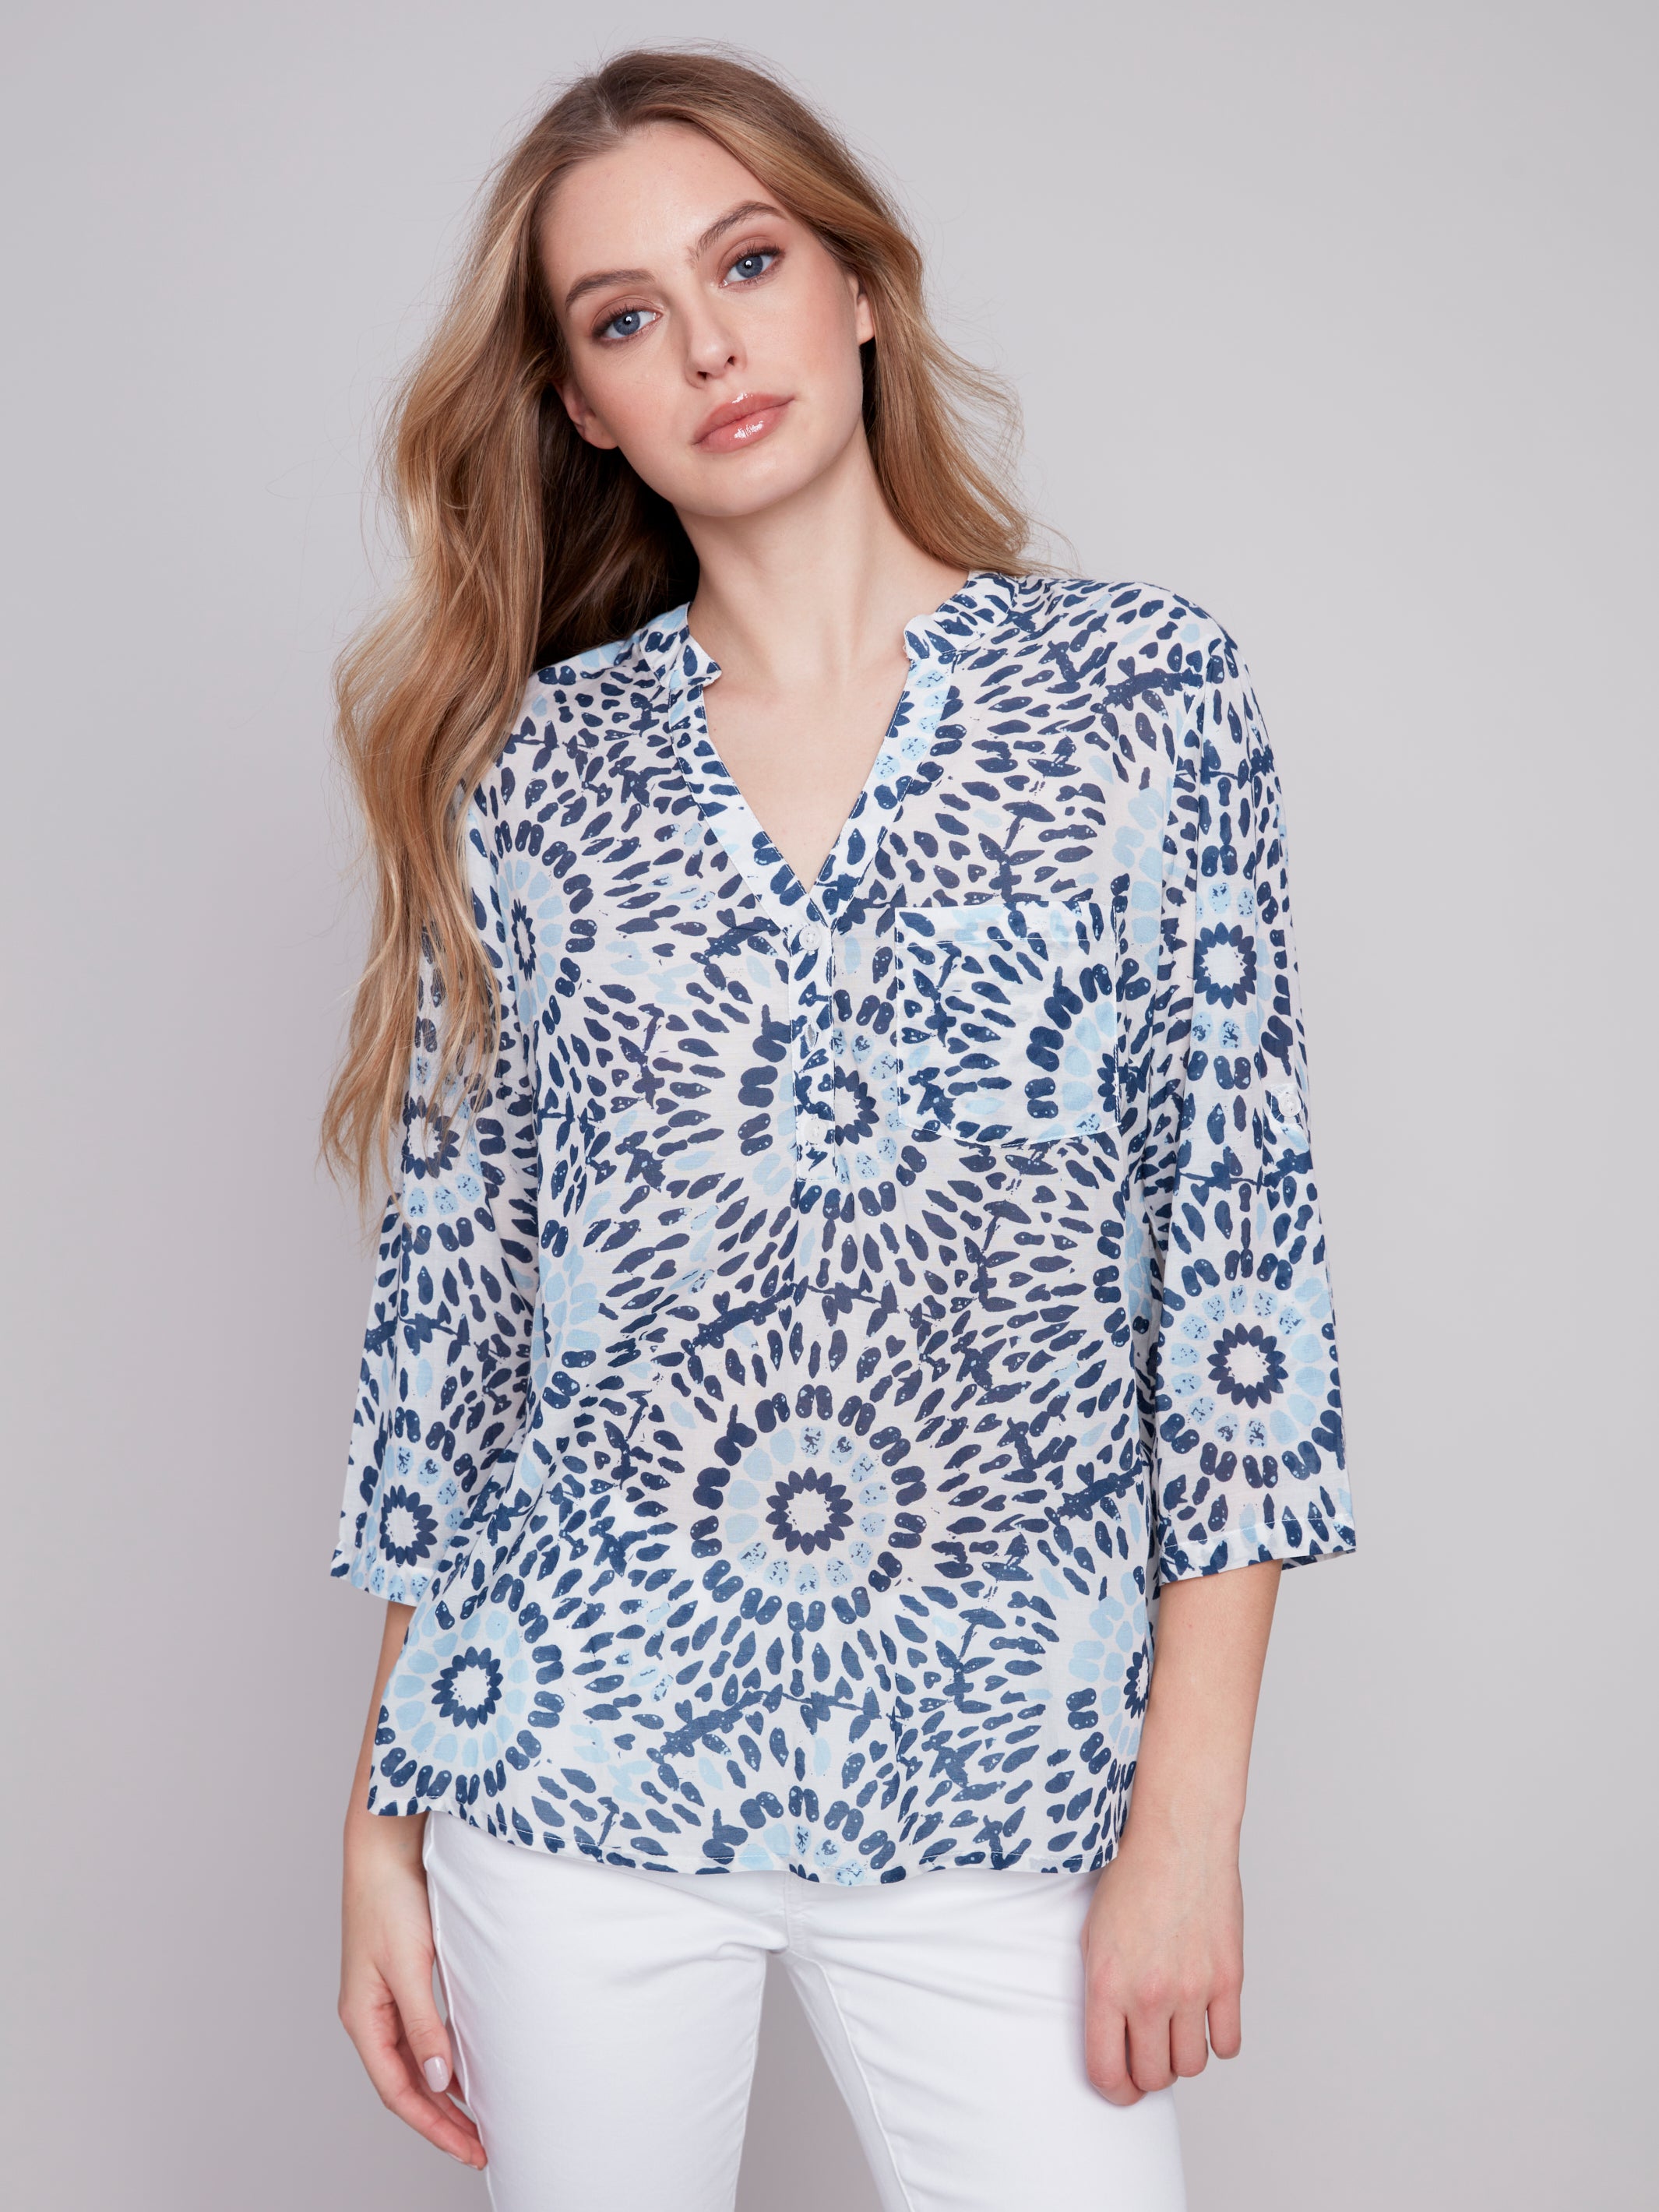 Printed Rayon Roll Up Sleeve Blouse C4188/884B